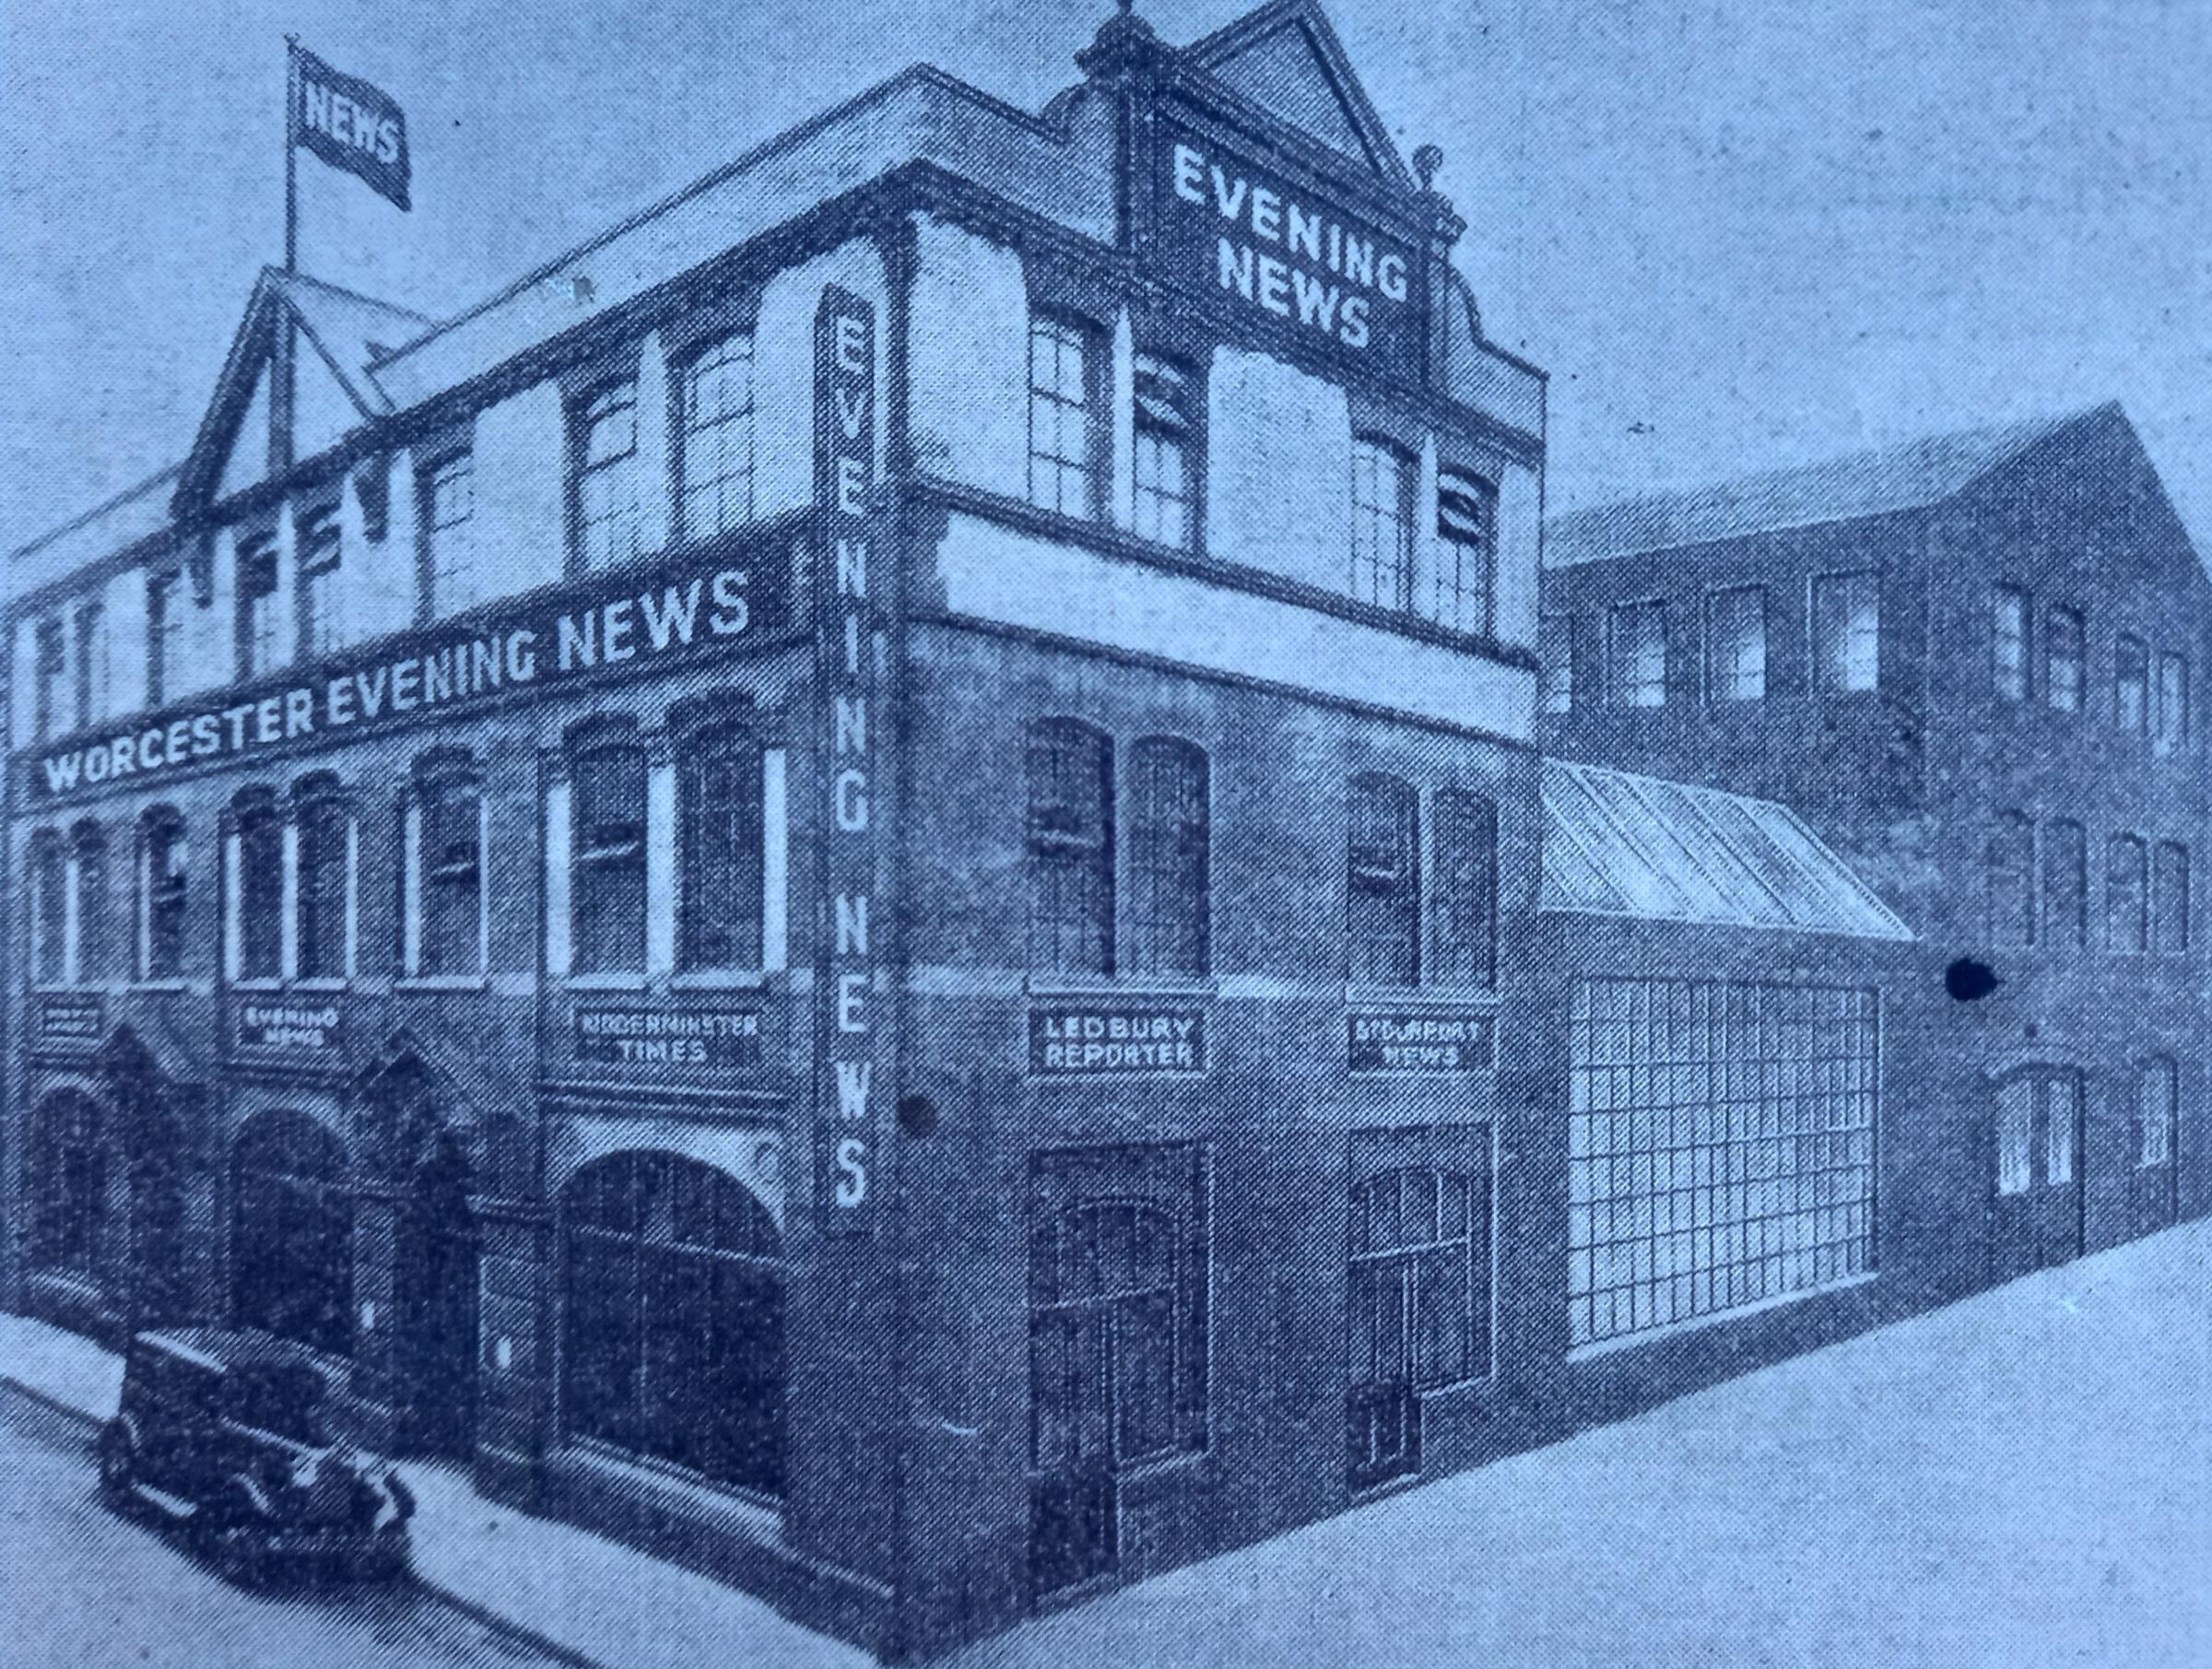 Worcester Evening News building in Trinity Street before the company merged with the Daily Times in the mid-1930s  to become the Worcester Evening News and Times, a title still remembered by some